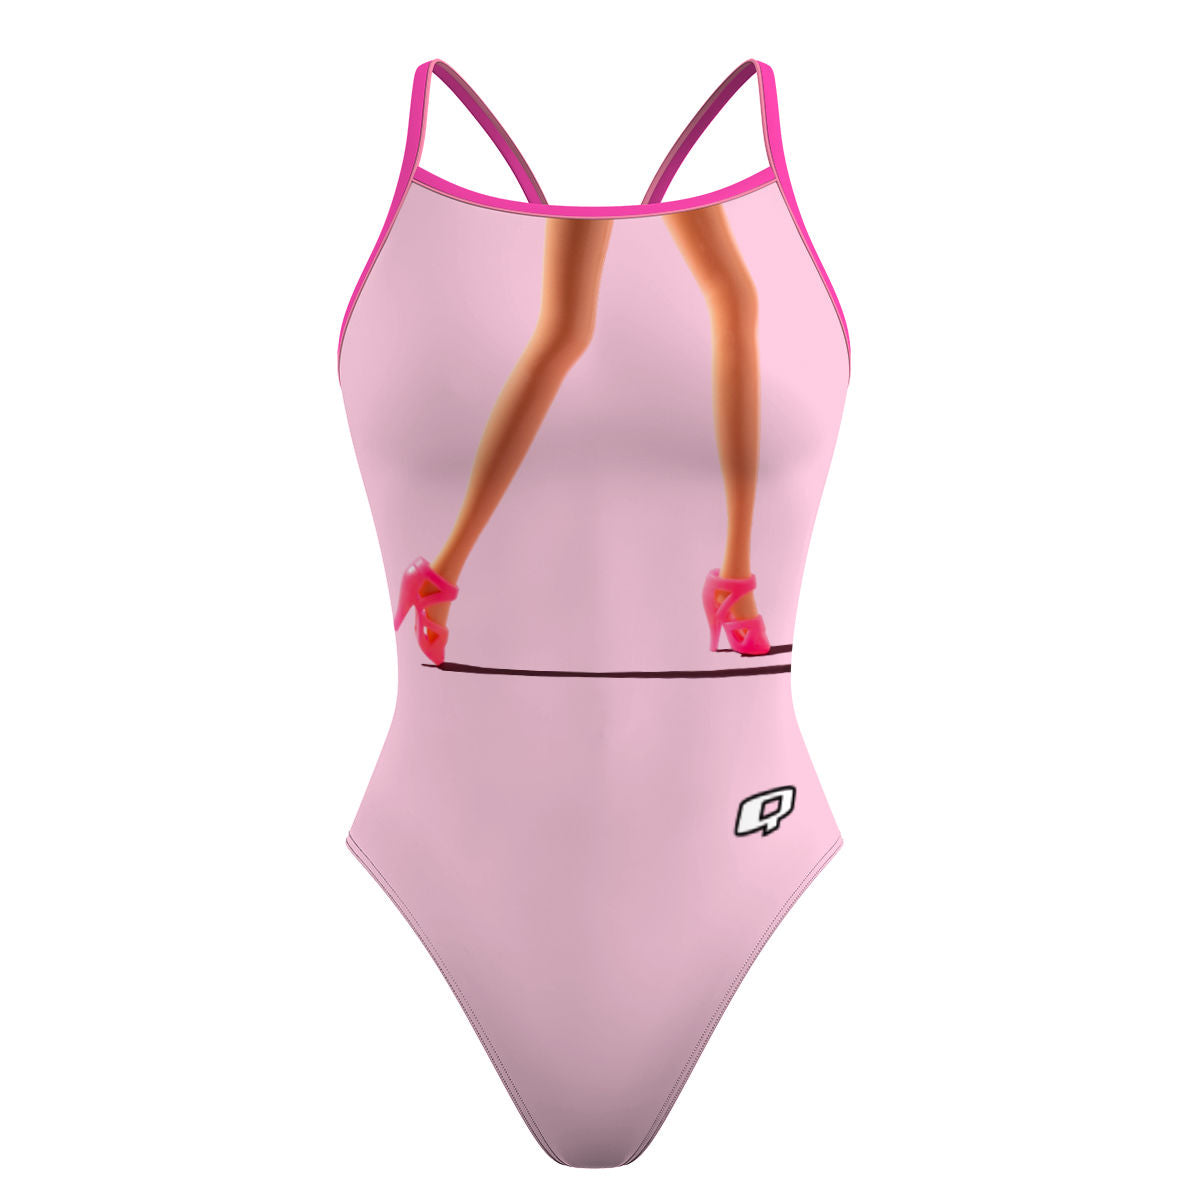 Pink legs for days - Skinny Strap Swimsuit